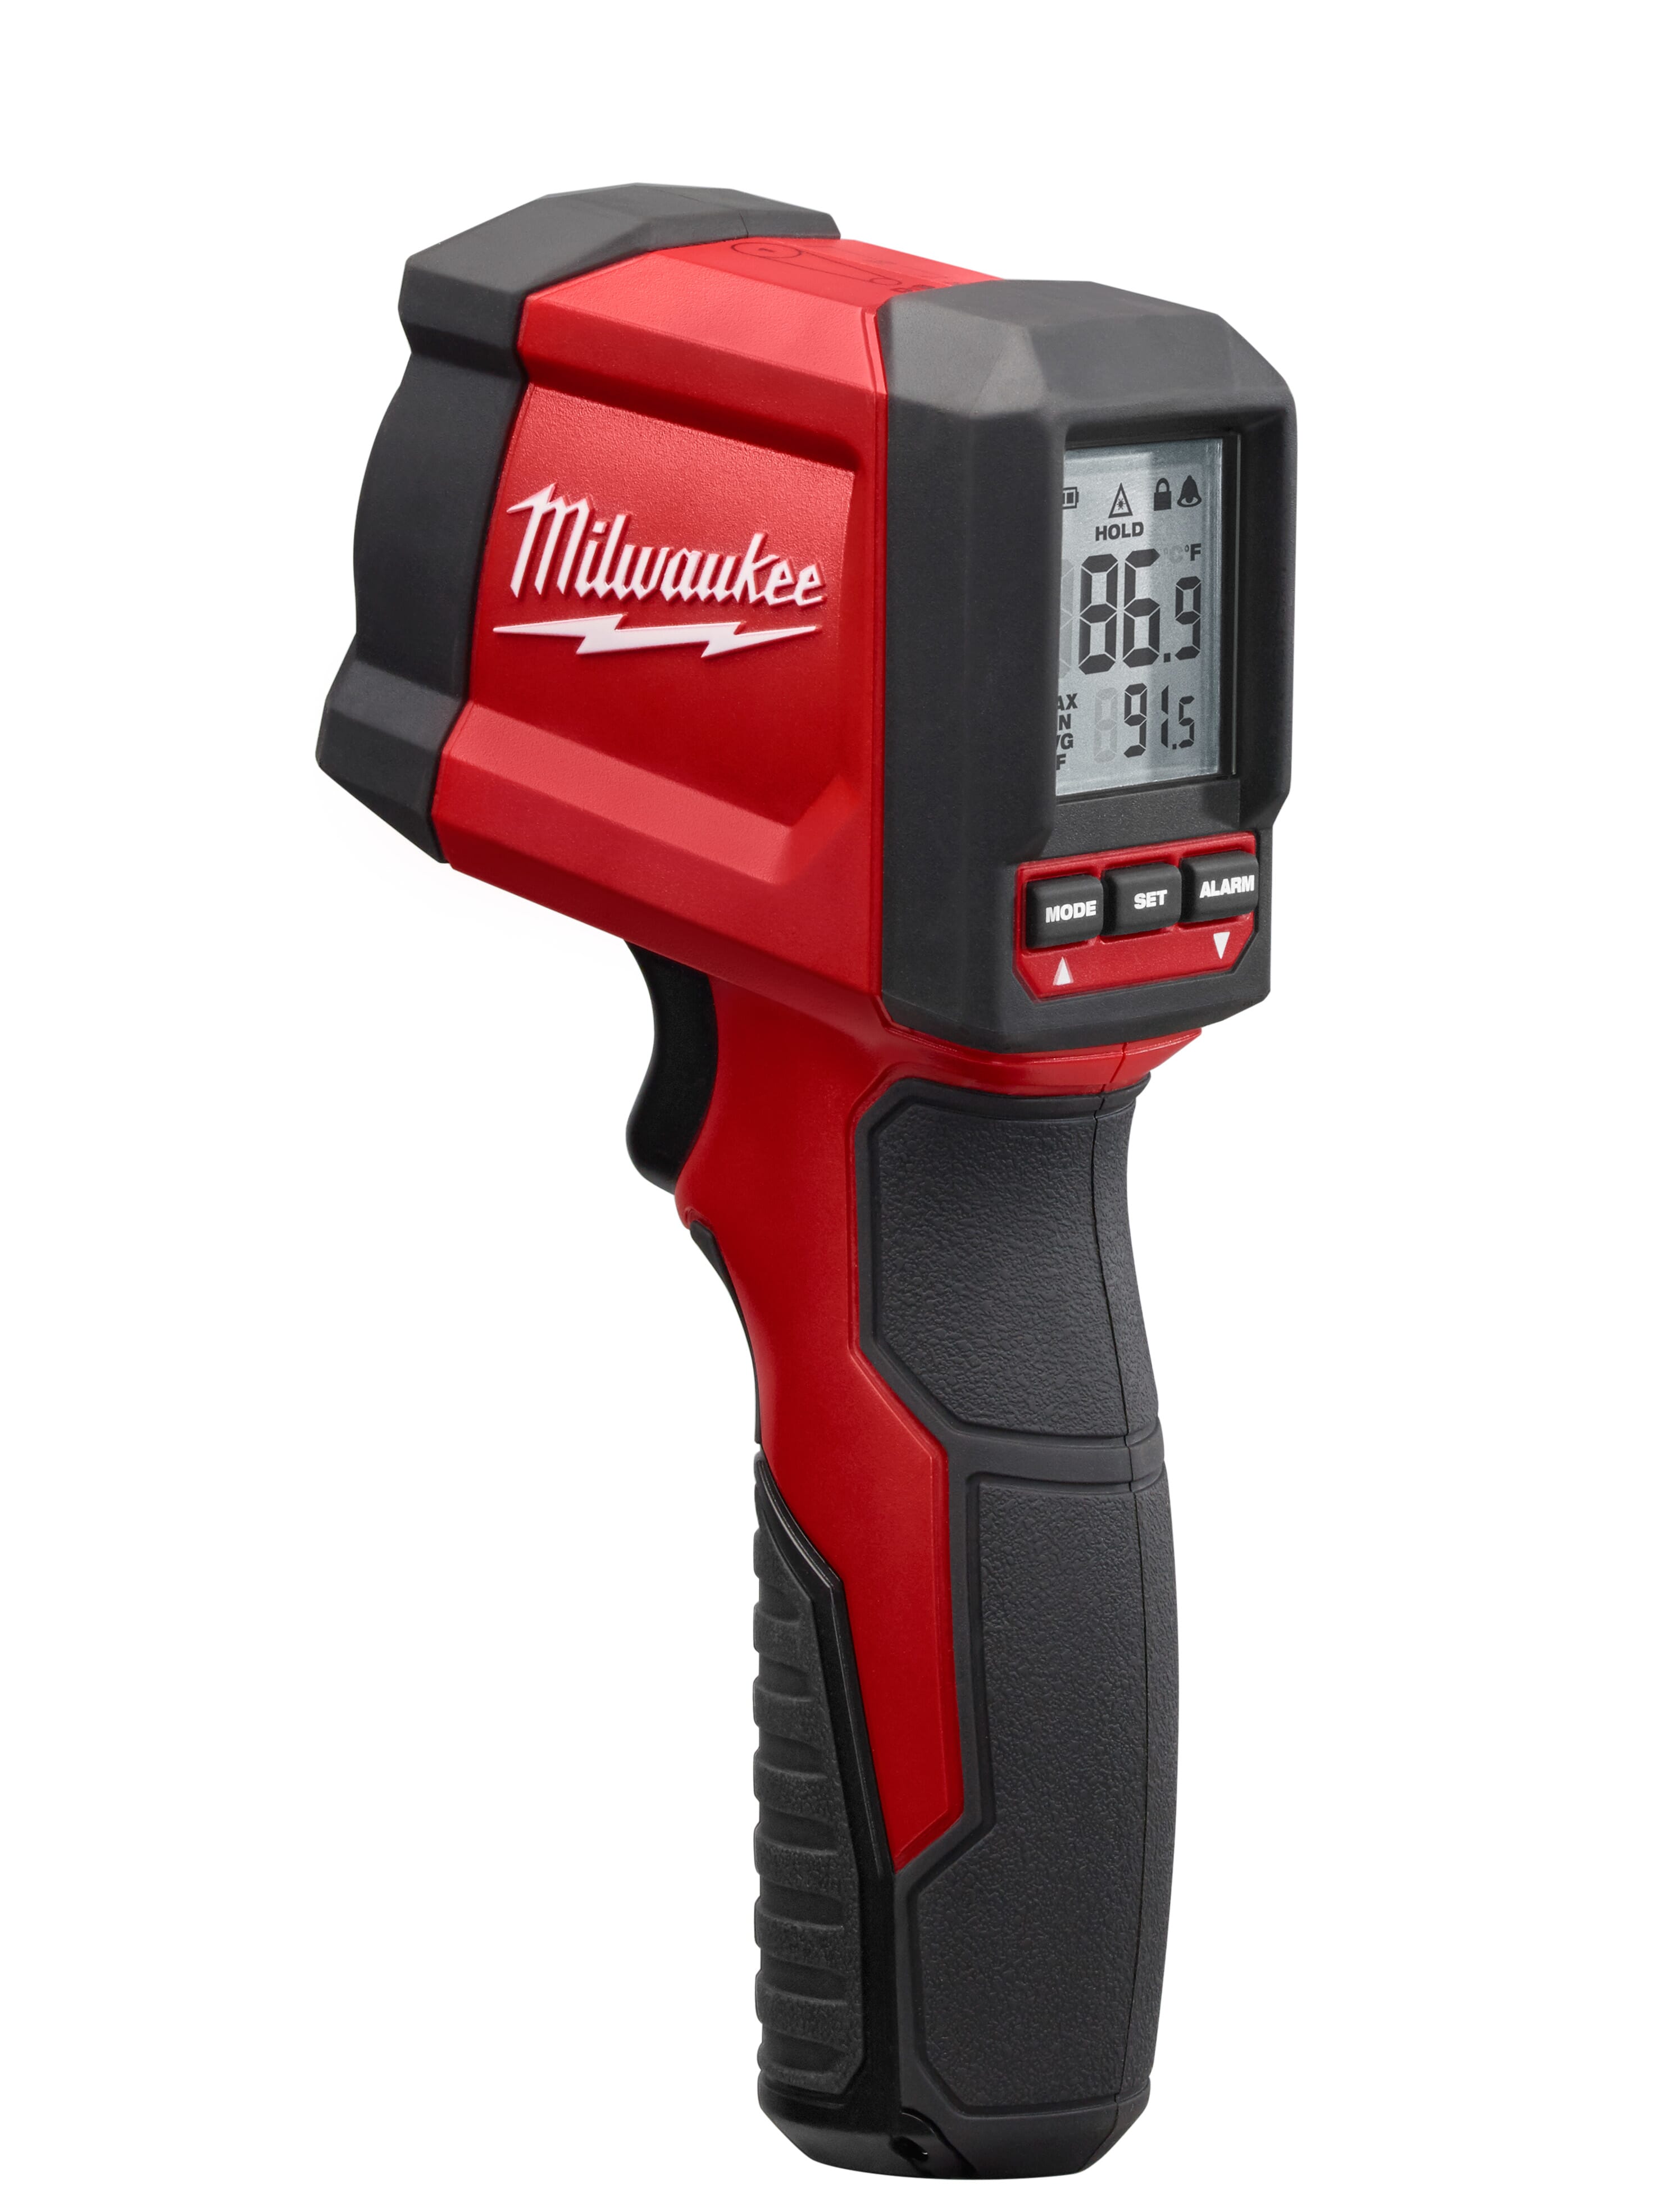 Milwaukee® 2267-20 Infrared Thermometer, -22 to 1022 deg F, +/-2 % Accuracy, 10:1 Focus Spot, 0.95 Fixed, 9 VDC Alkaline Battery